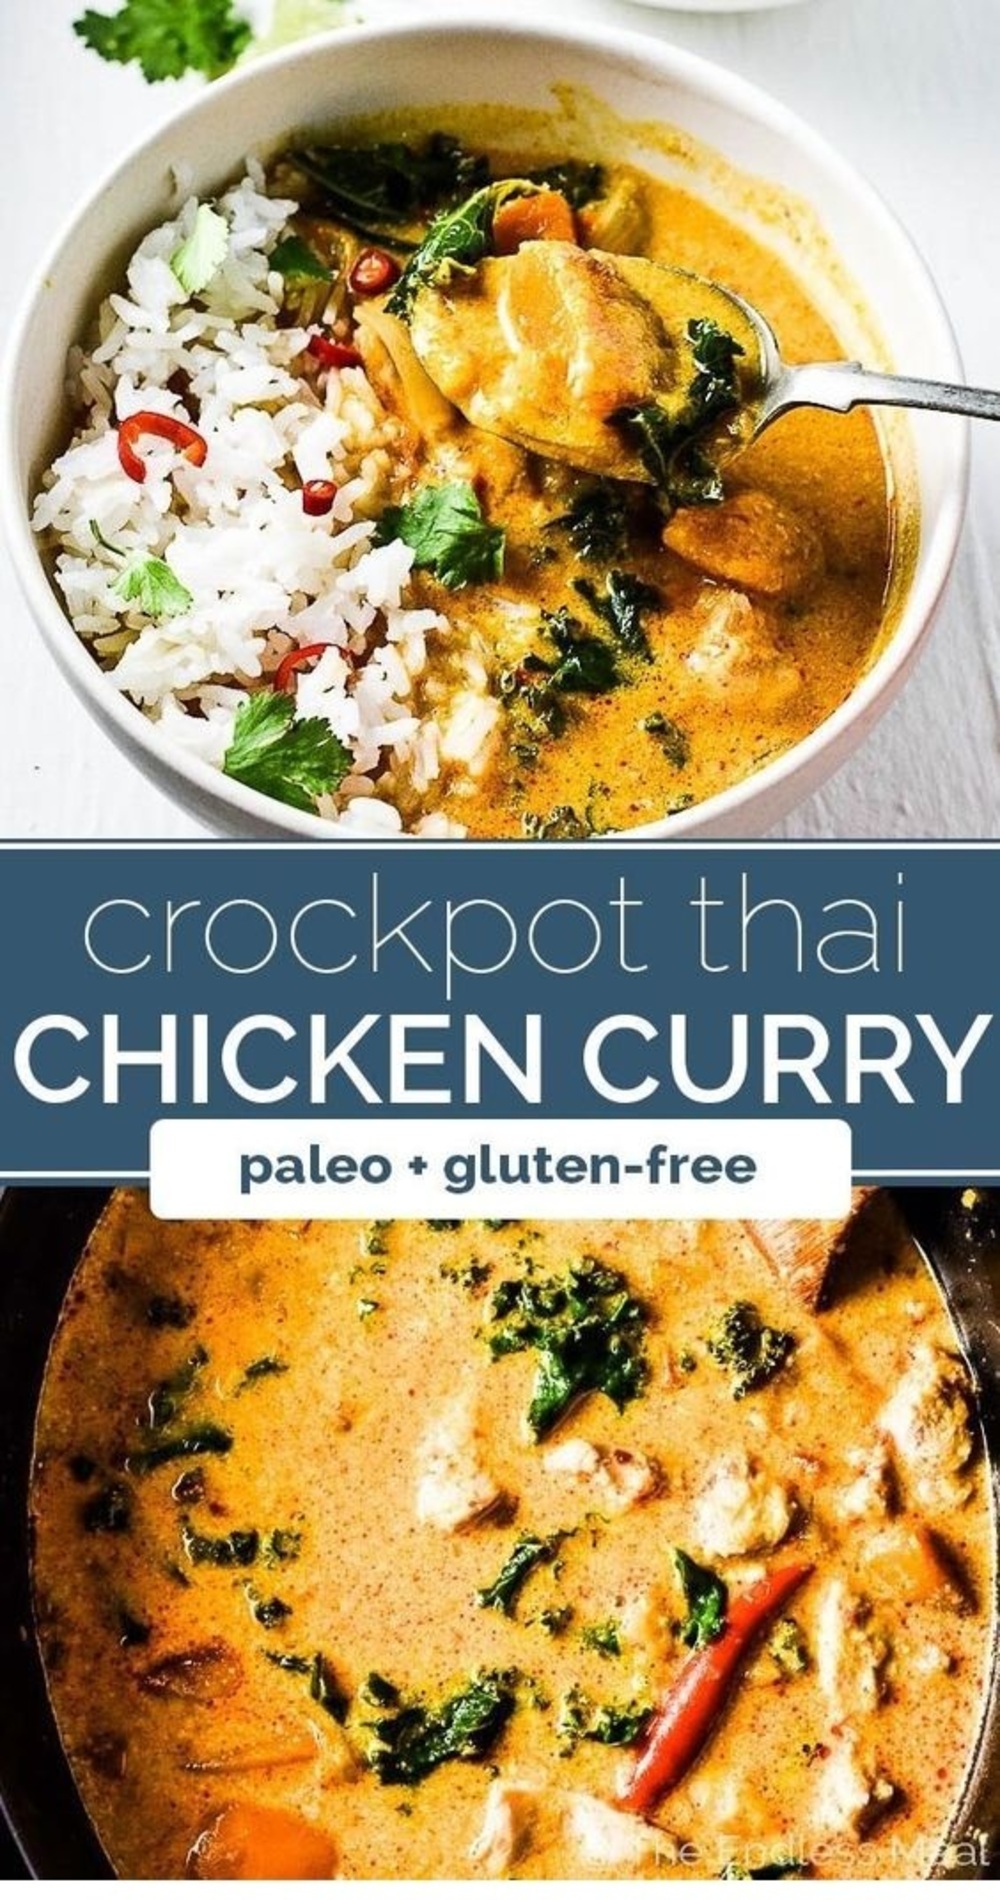 Crockpot | Crock Pot Thai Chicken Curry Food beverage recipes for ...